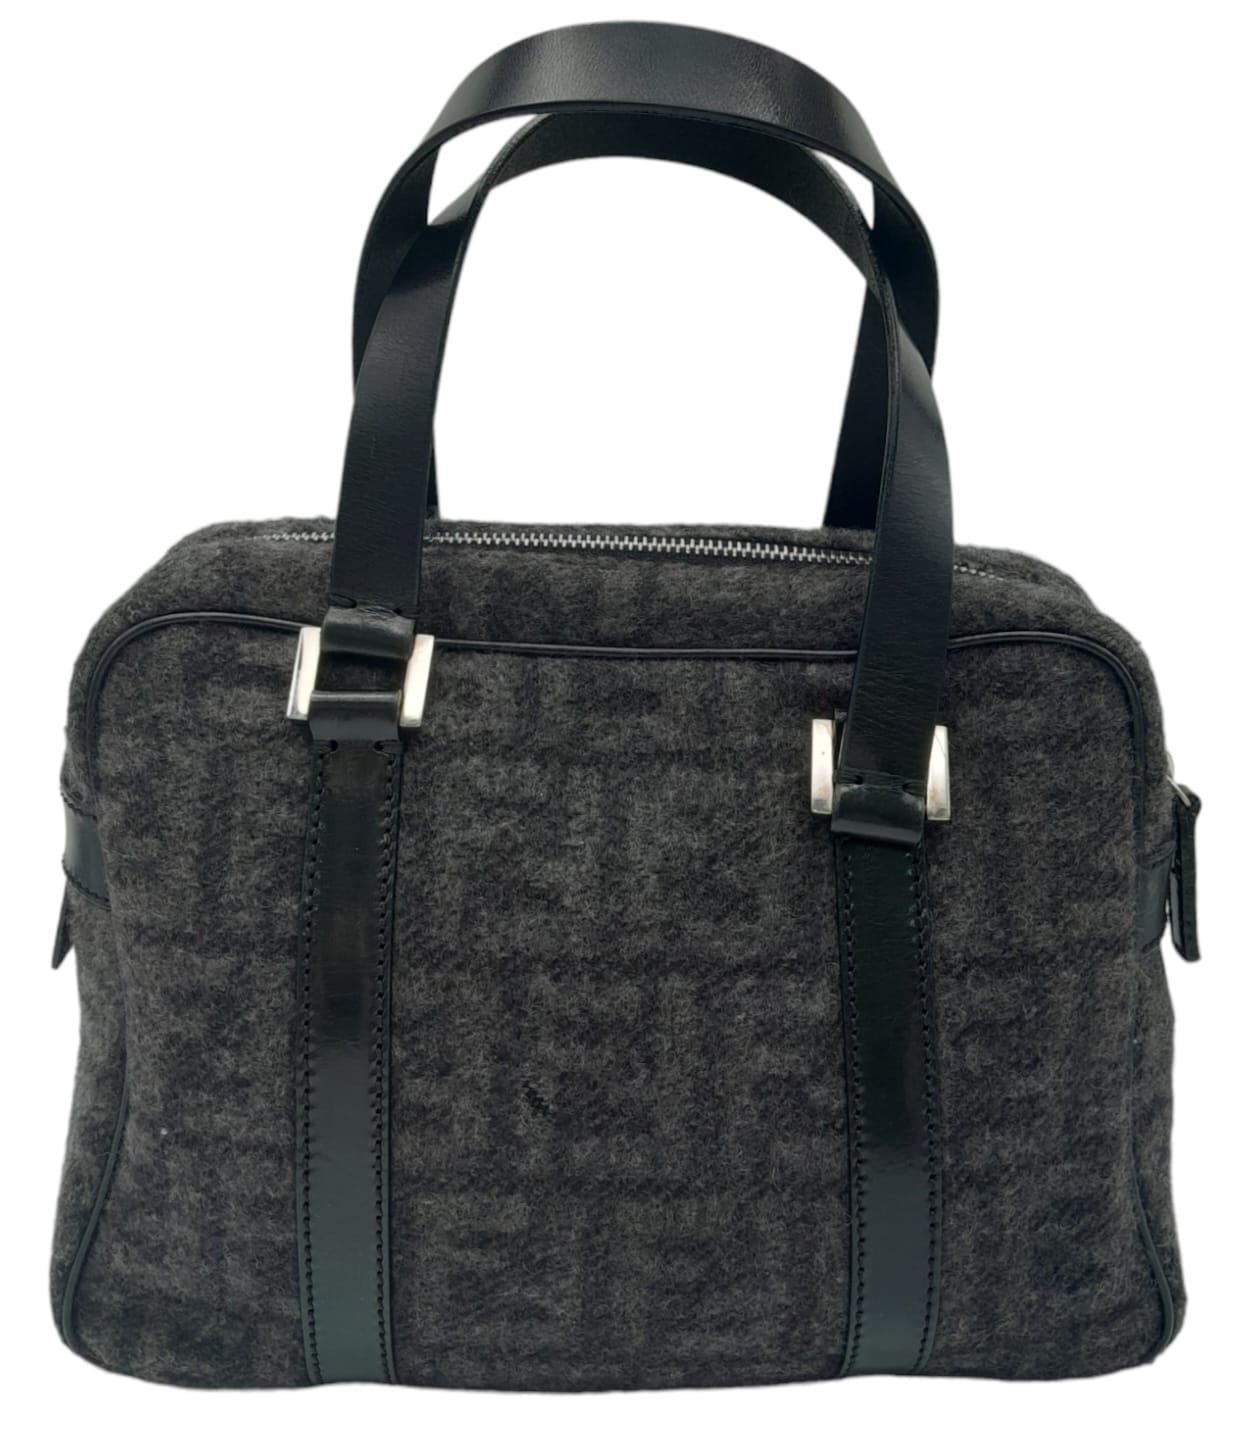 A Fendi Black and Charcoal Grey Bag. Textile exterior with black leather handles, silver-toned